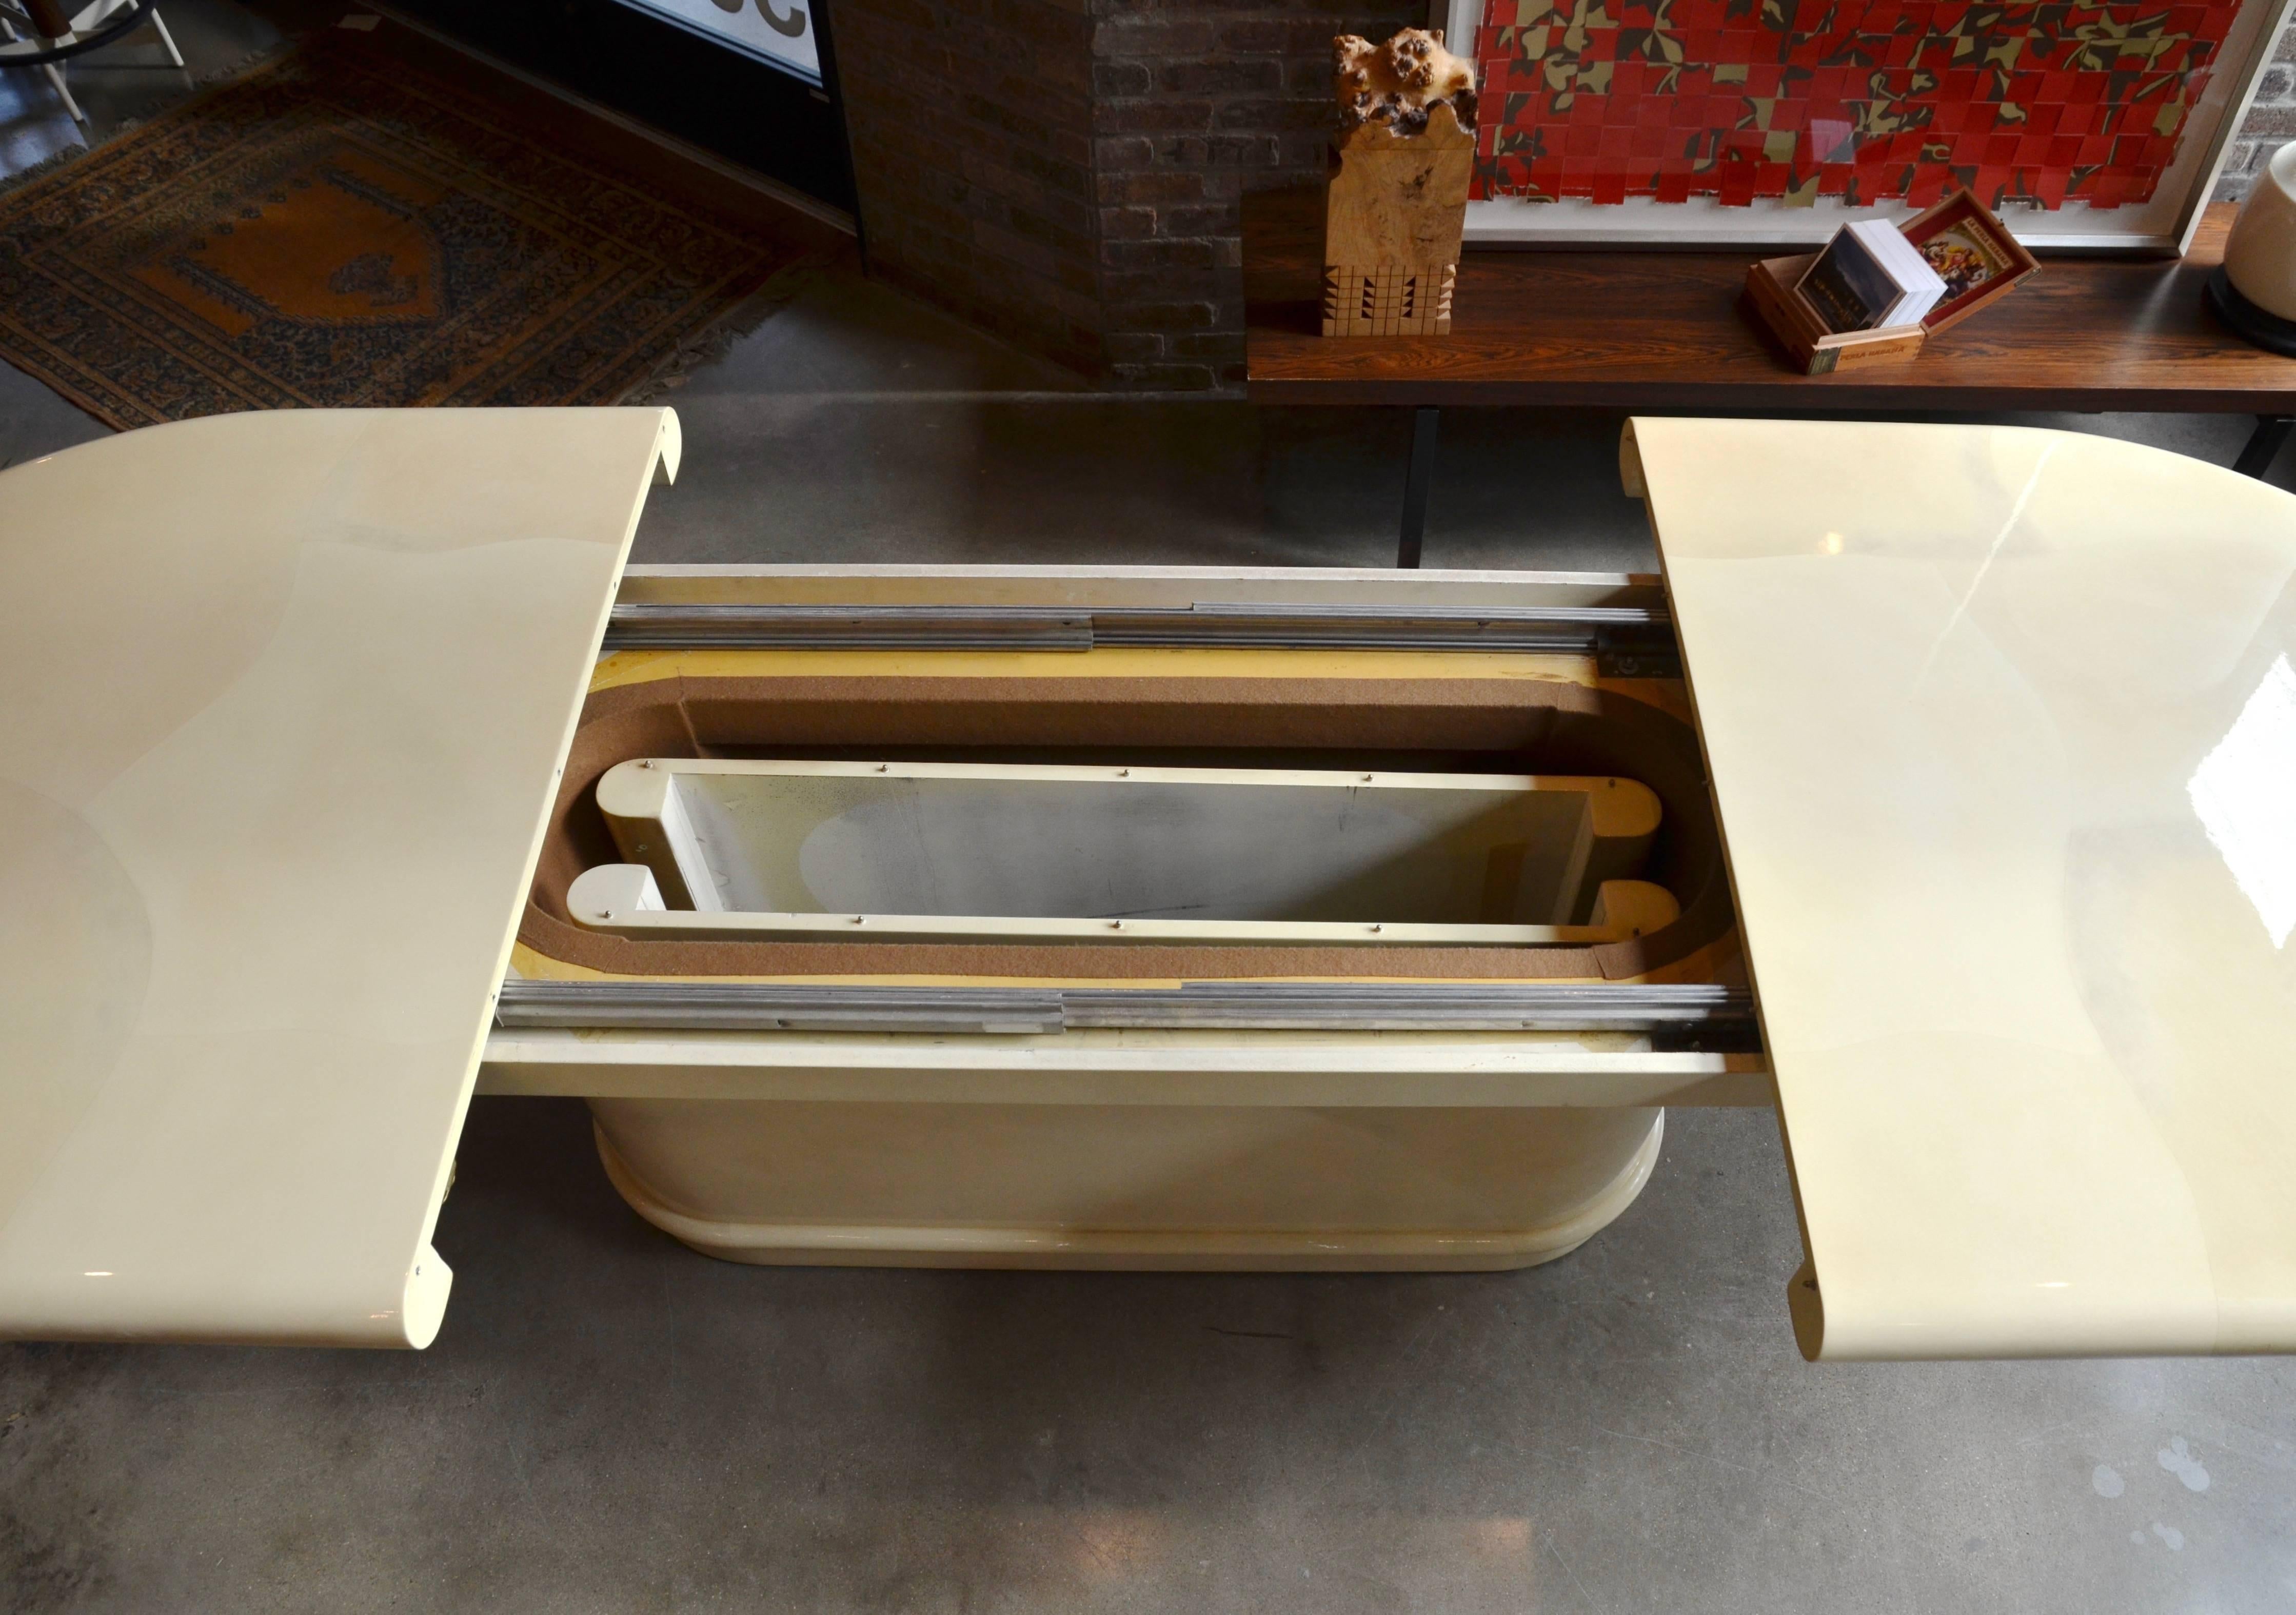 Lacquered Cream Extendable Dining Table in Goatskin Style Lacquer:  Karl Springer 1980's